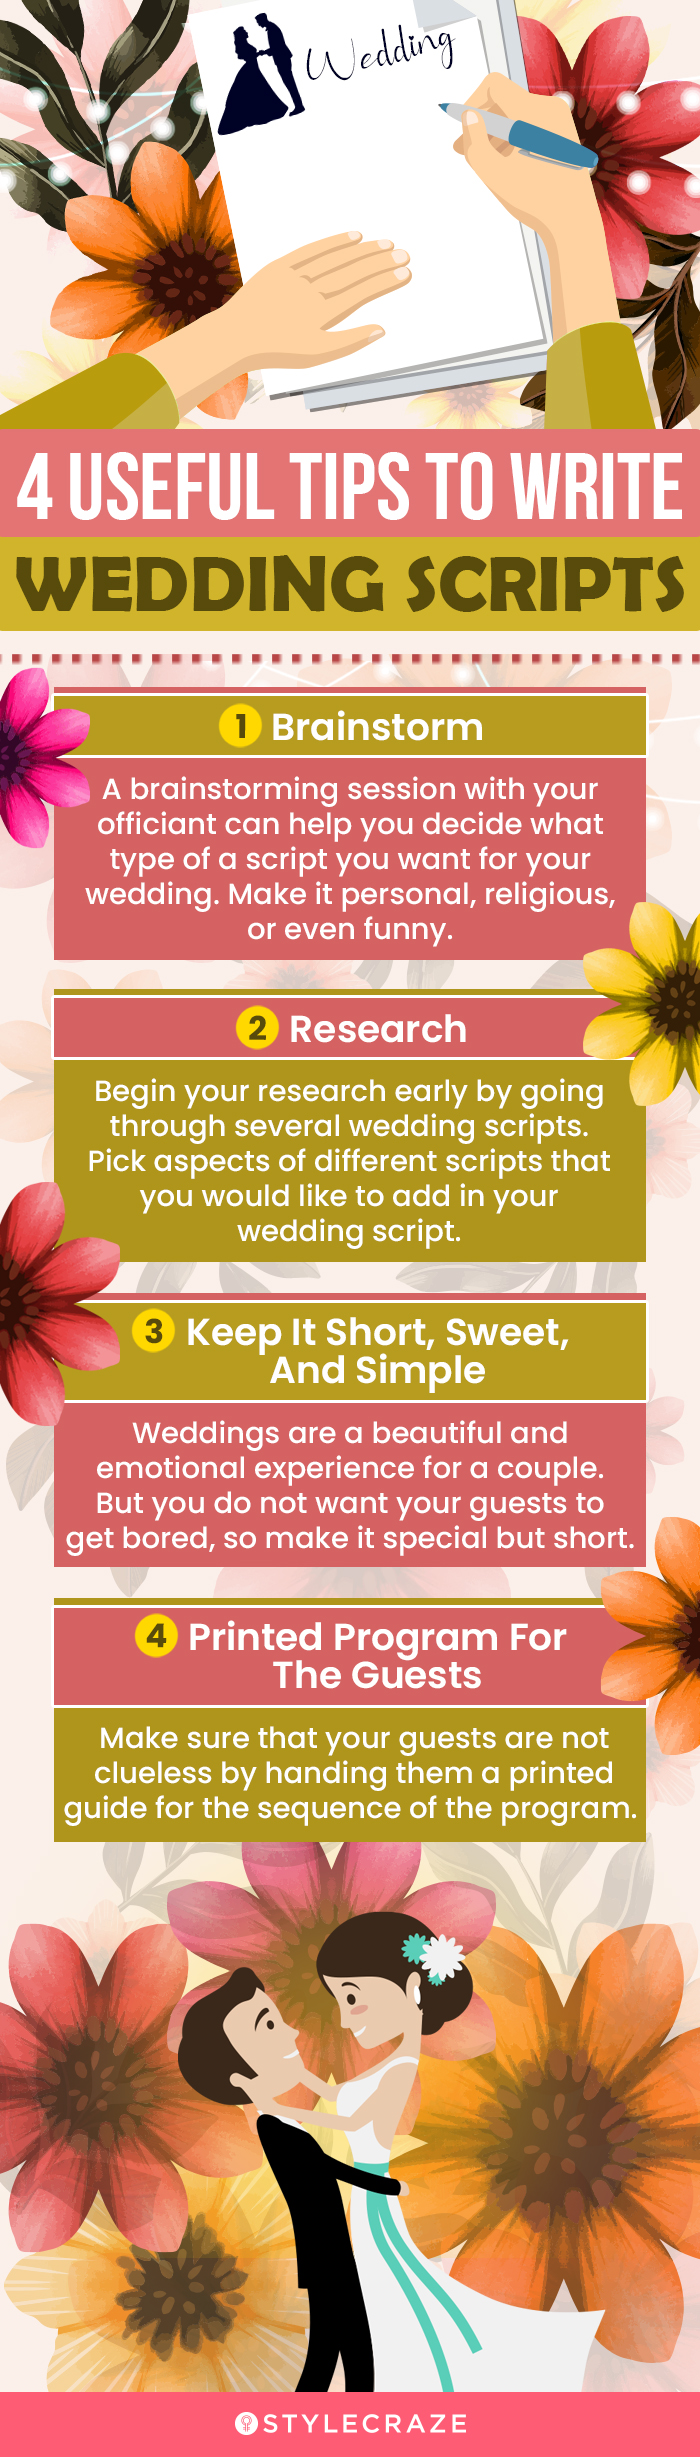 6 Sample Wedding Ceremony Scripts And Writing Tips For All Types Of Weddings